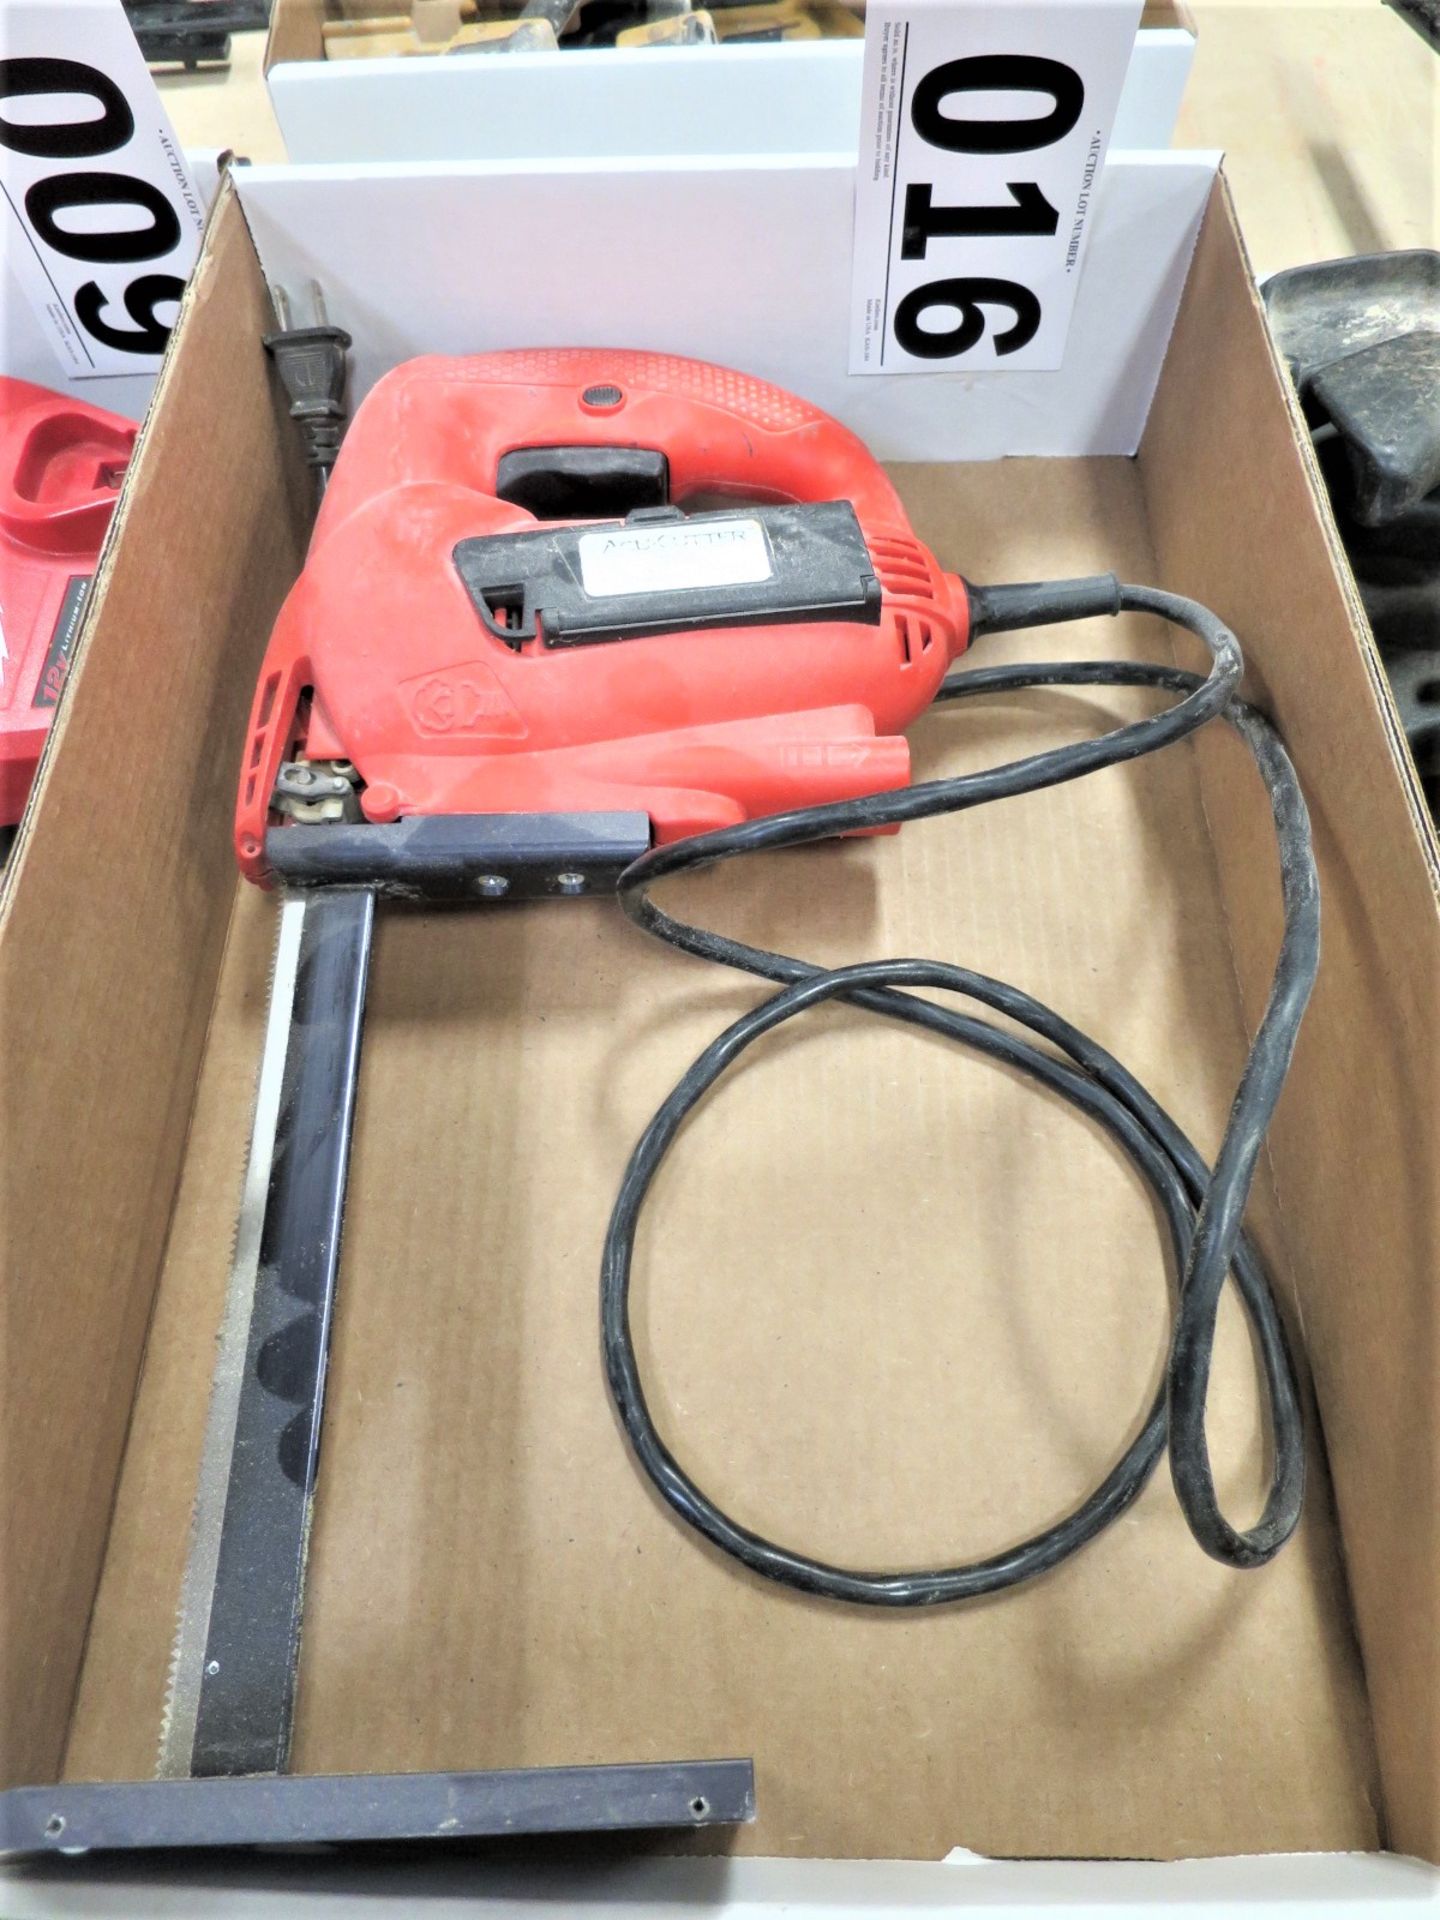 Acucutter 350 Saw